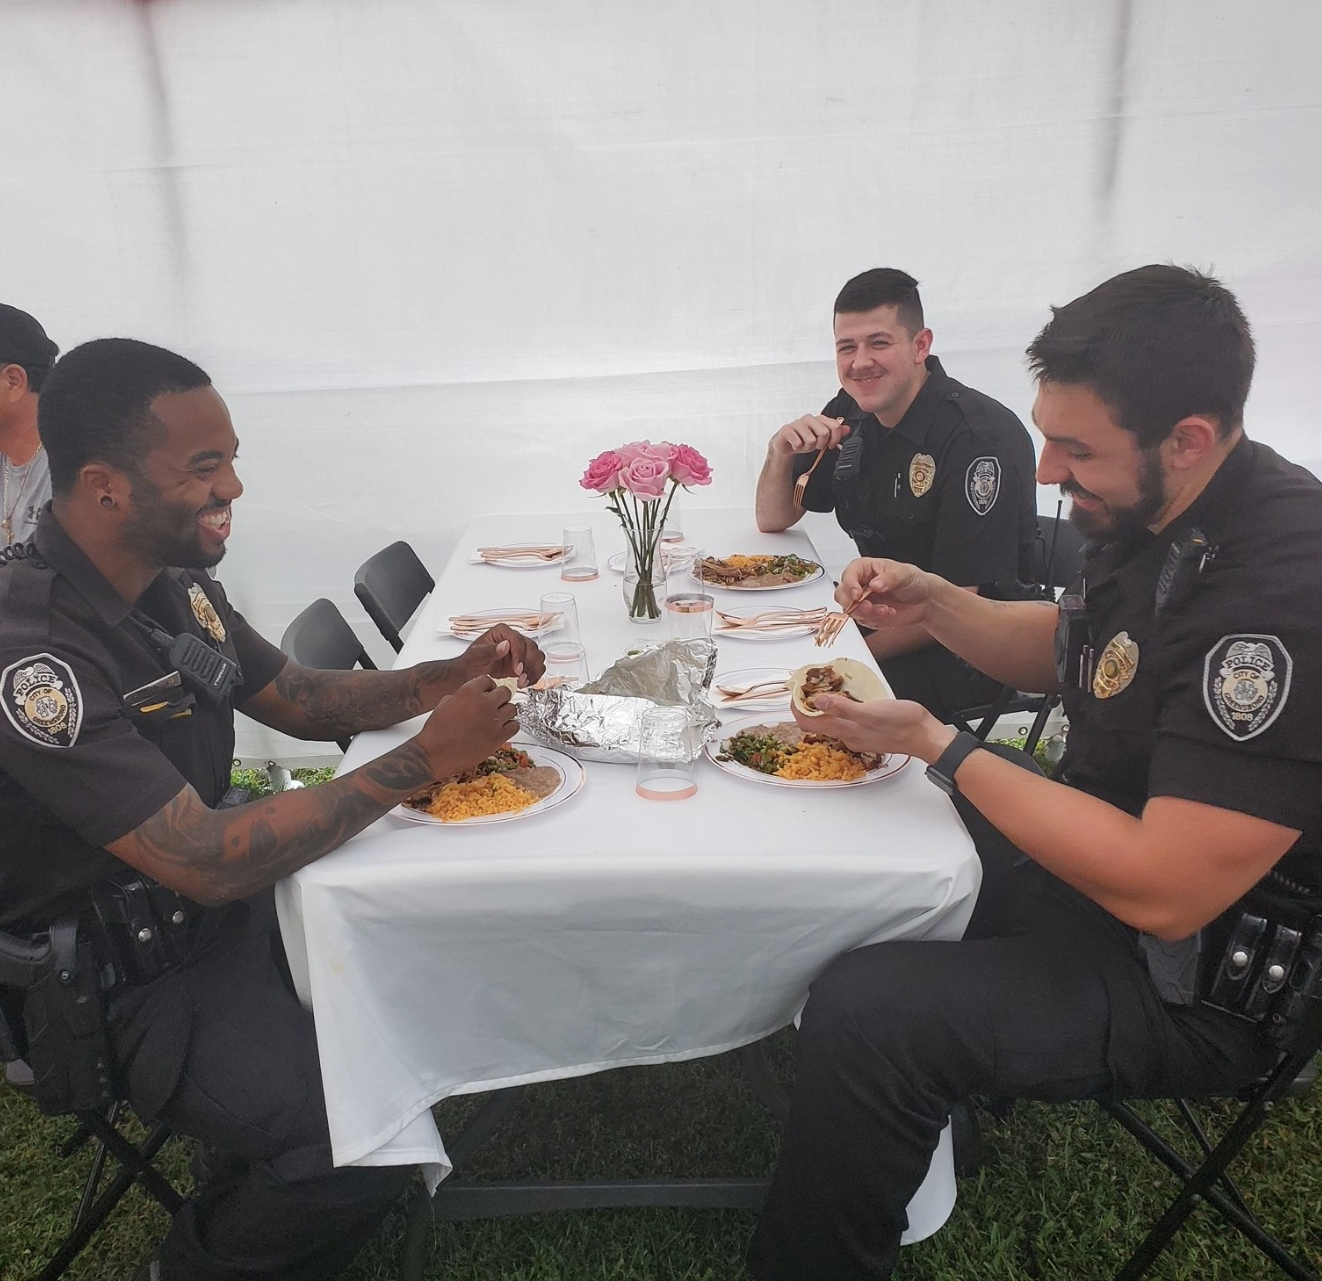 greensboro police officers smiling while eating at a quinceaÃ±era party